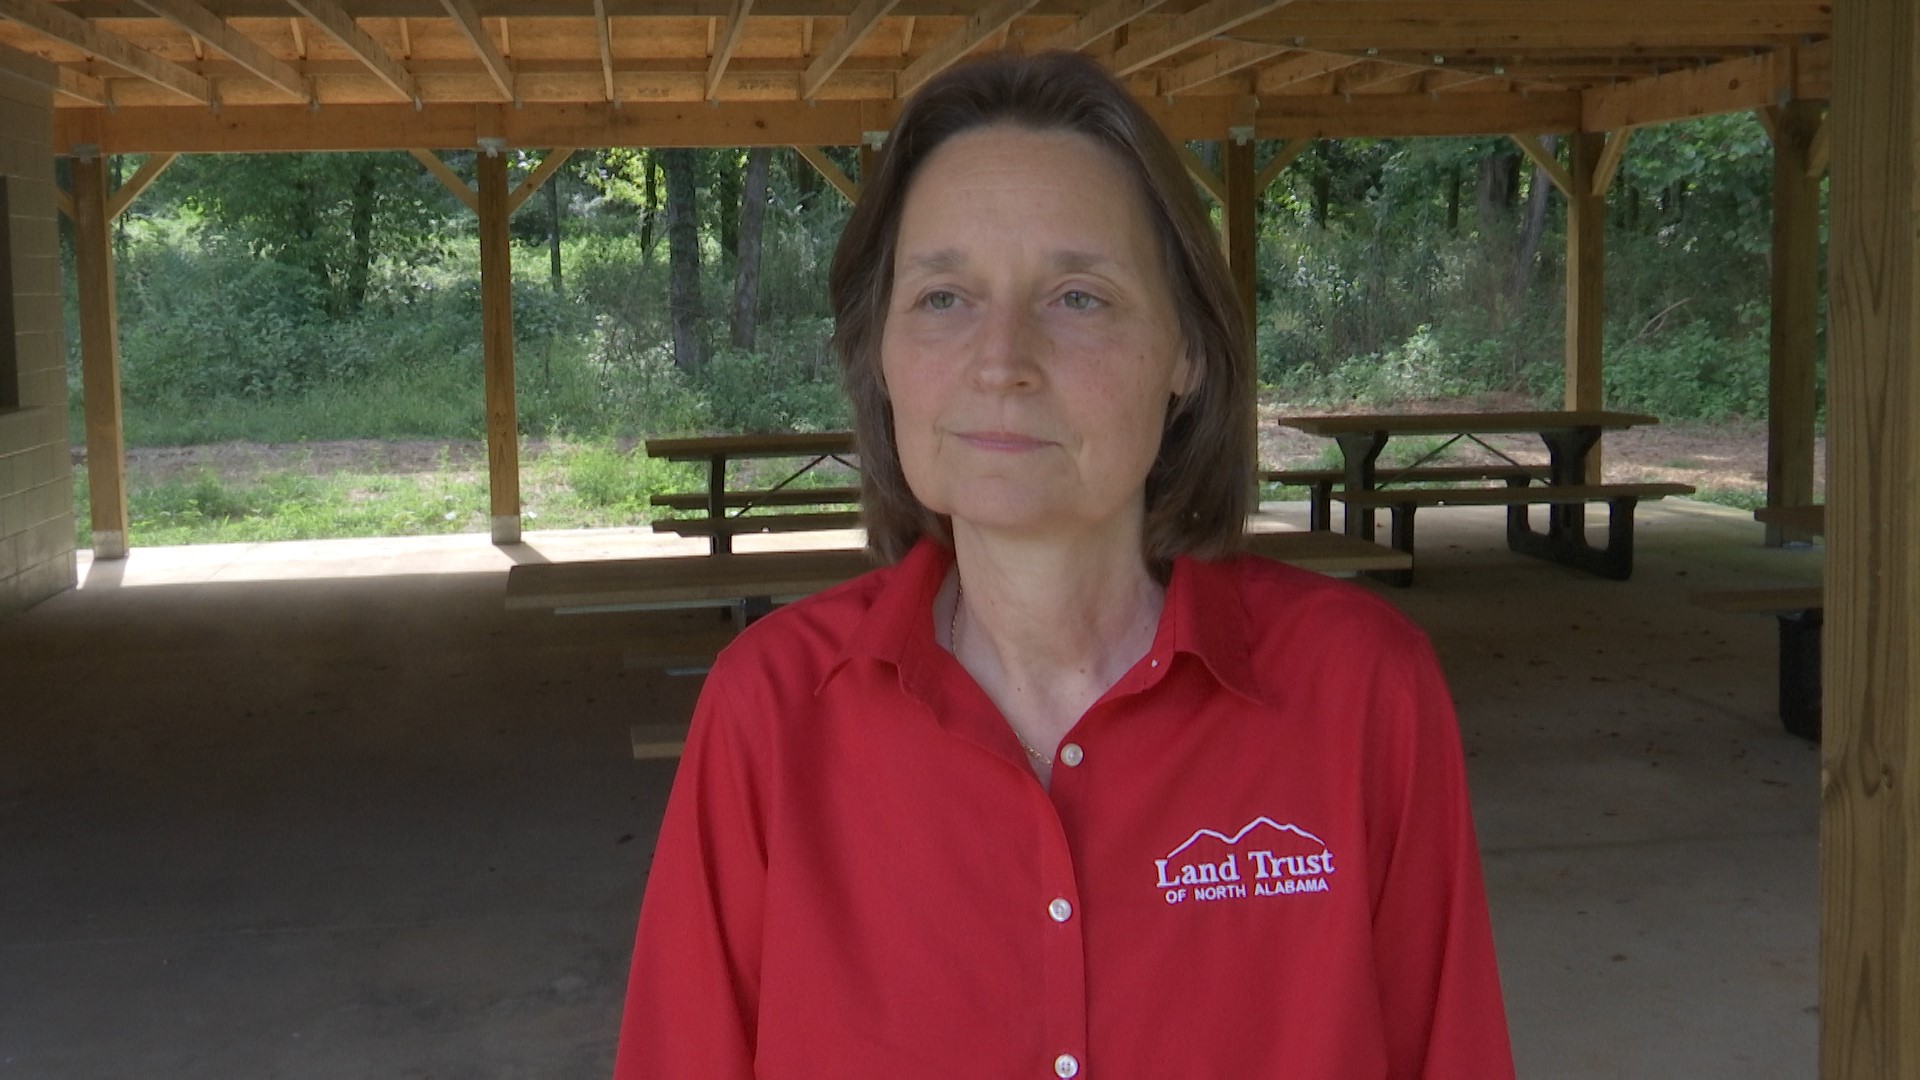 Lant Trust of North Alabama Executive Director, Marie Bostick, talks more about the future of the Chapman Mountain Nature Preserve.